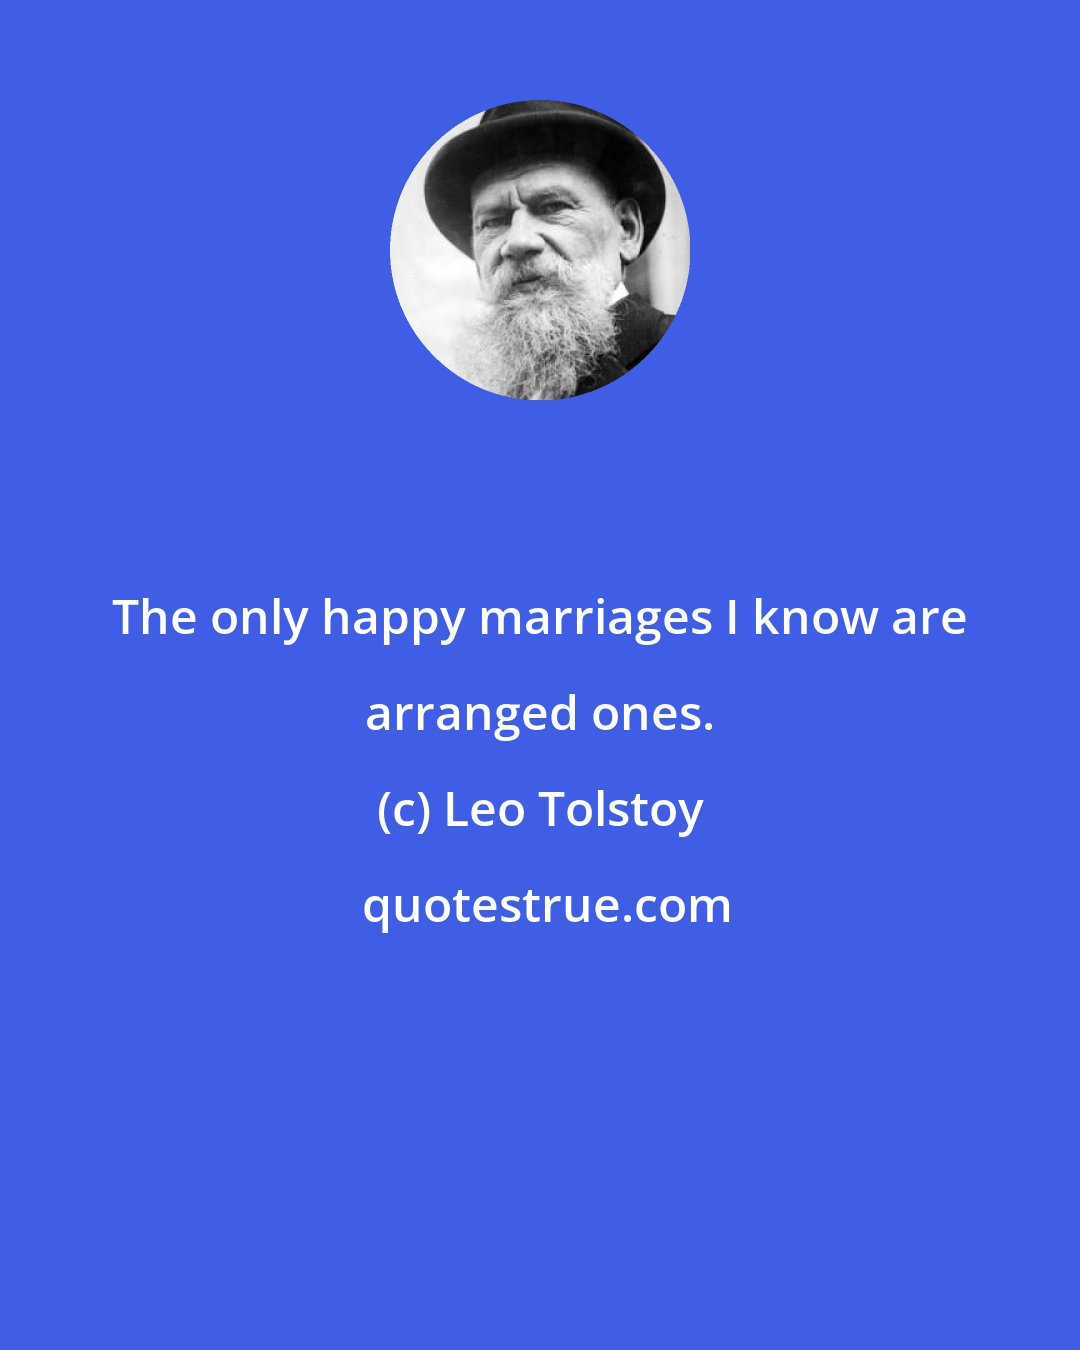 Leo Tolstoy: The only happy marriages I know are arranged ones.